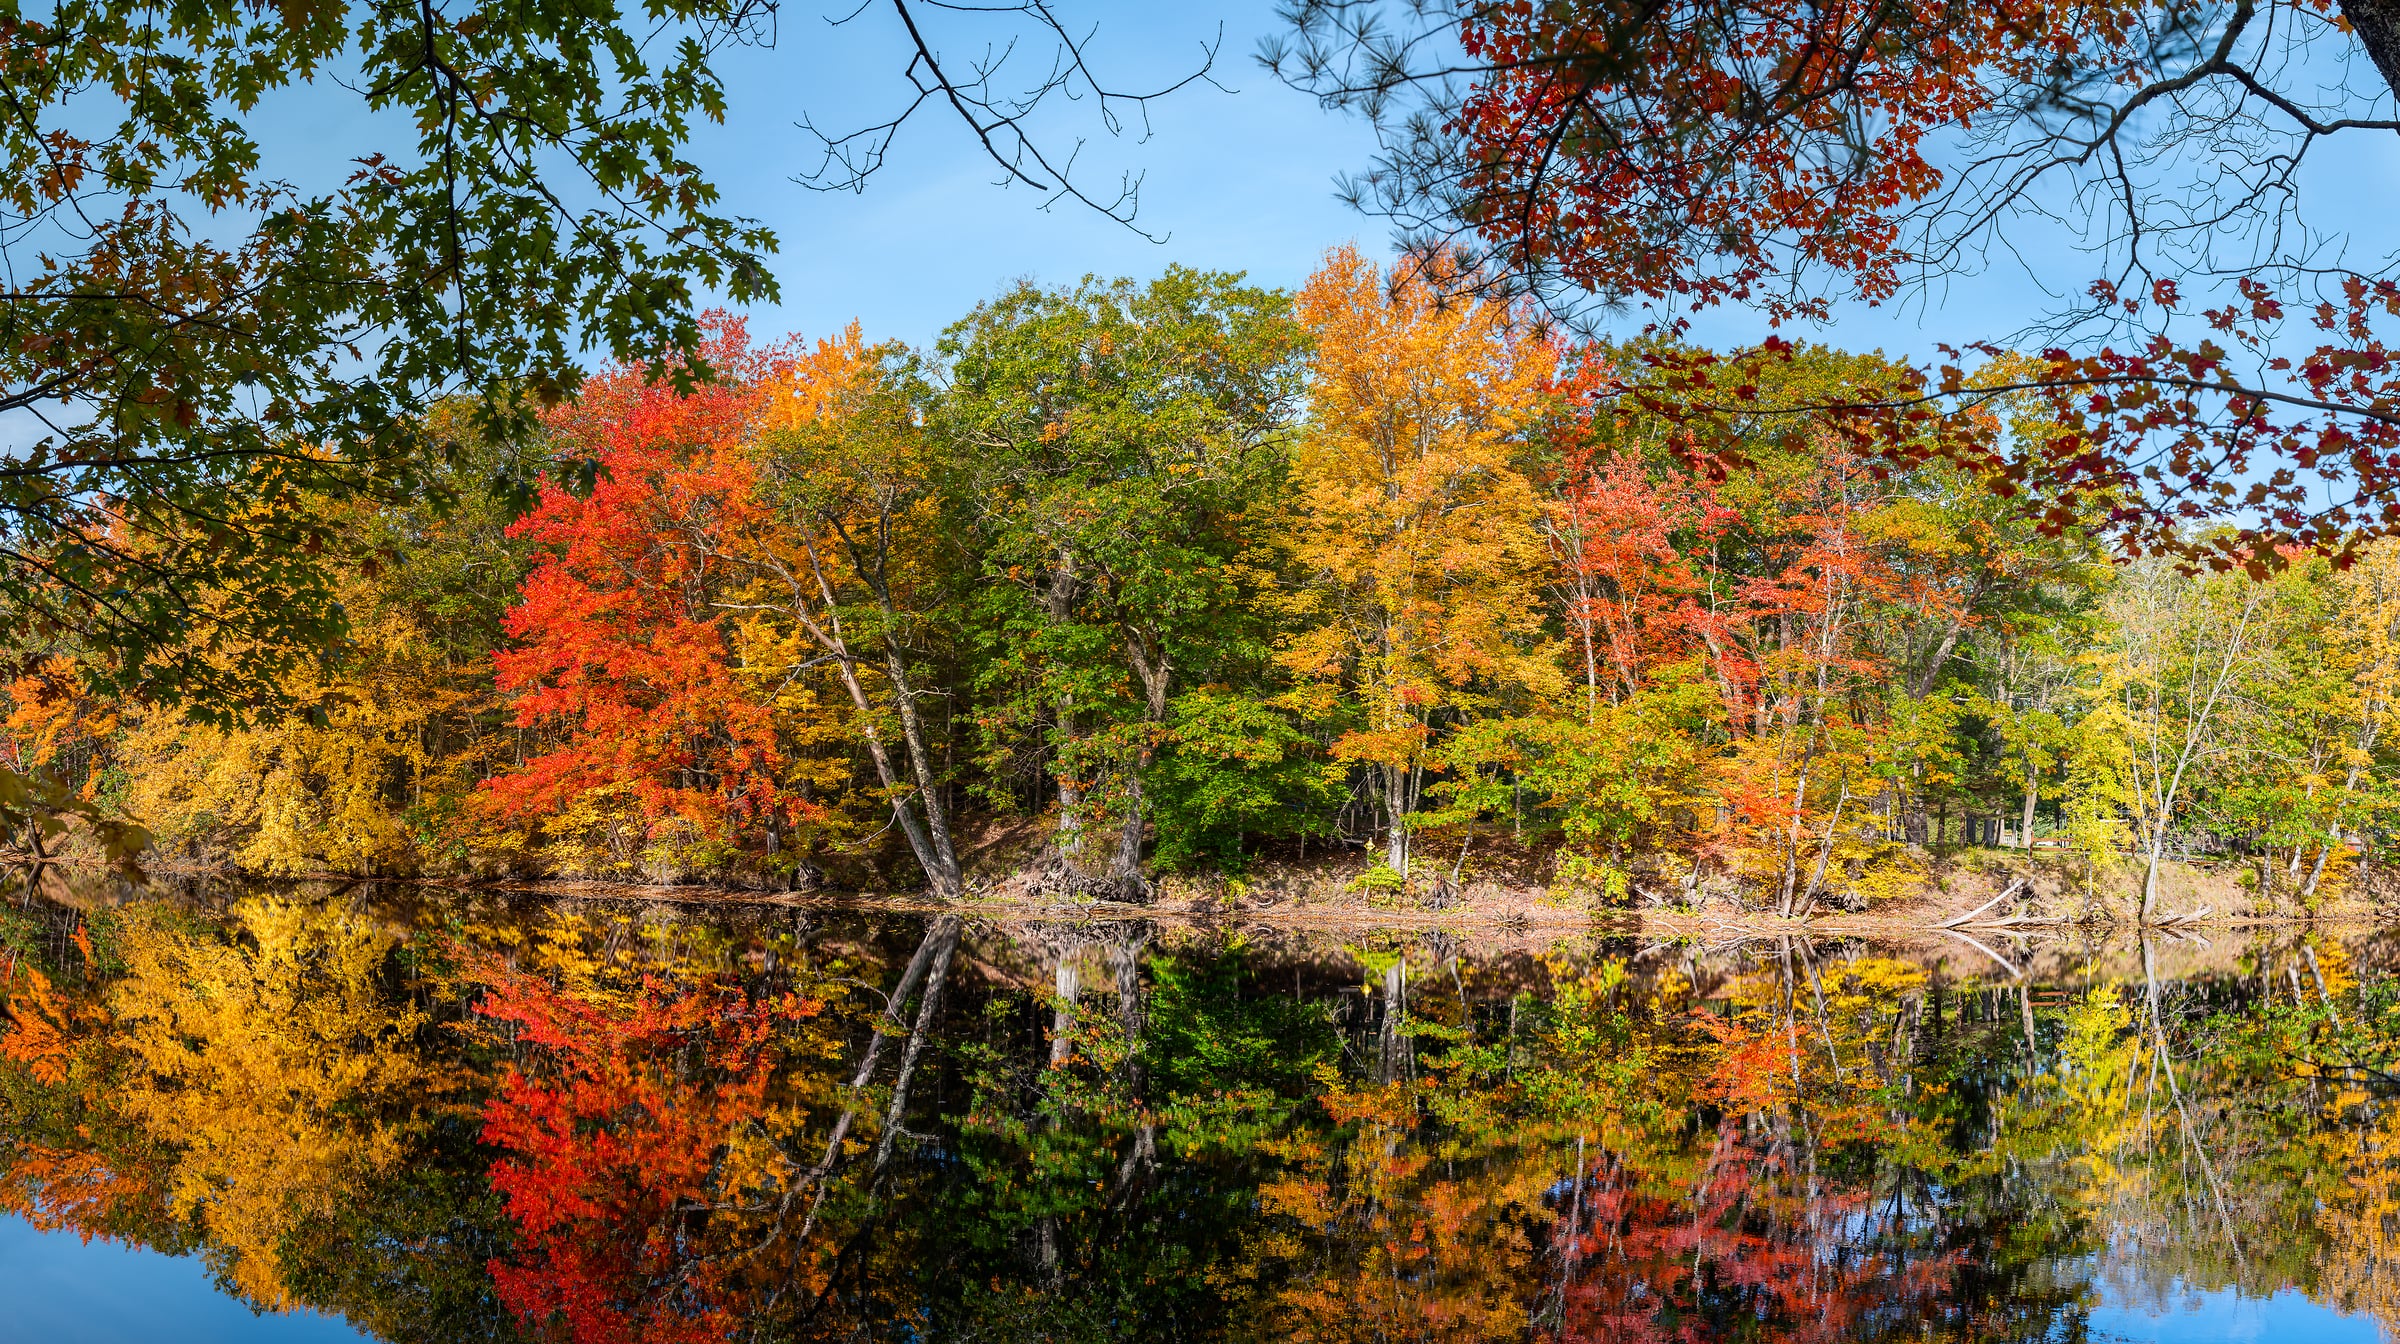 1,102 megapixels! A very high resolution, large-format VAST photo print of a river in autumn with trees and fall foliage reflecting in the water; nature photograph created by Jim Tarpo in Sacco River in Maine.